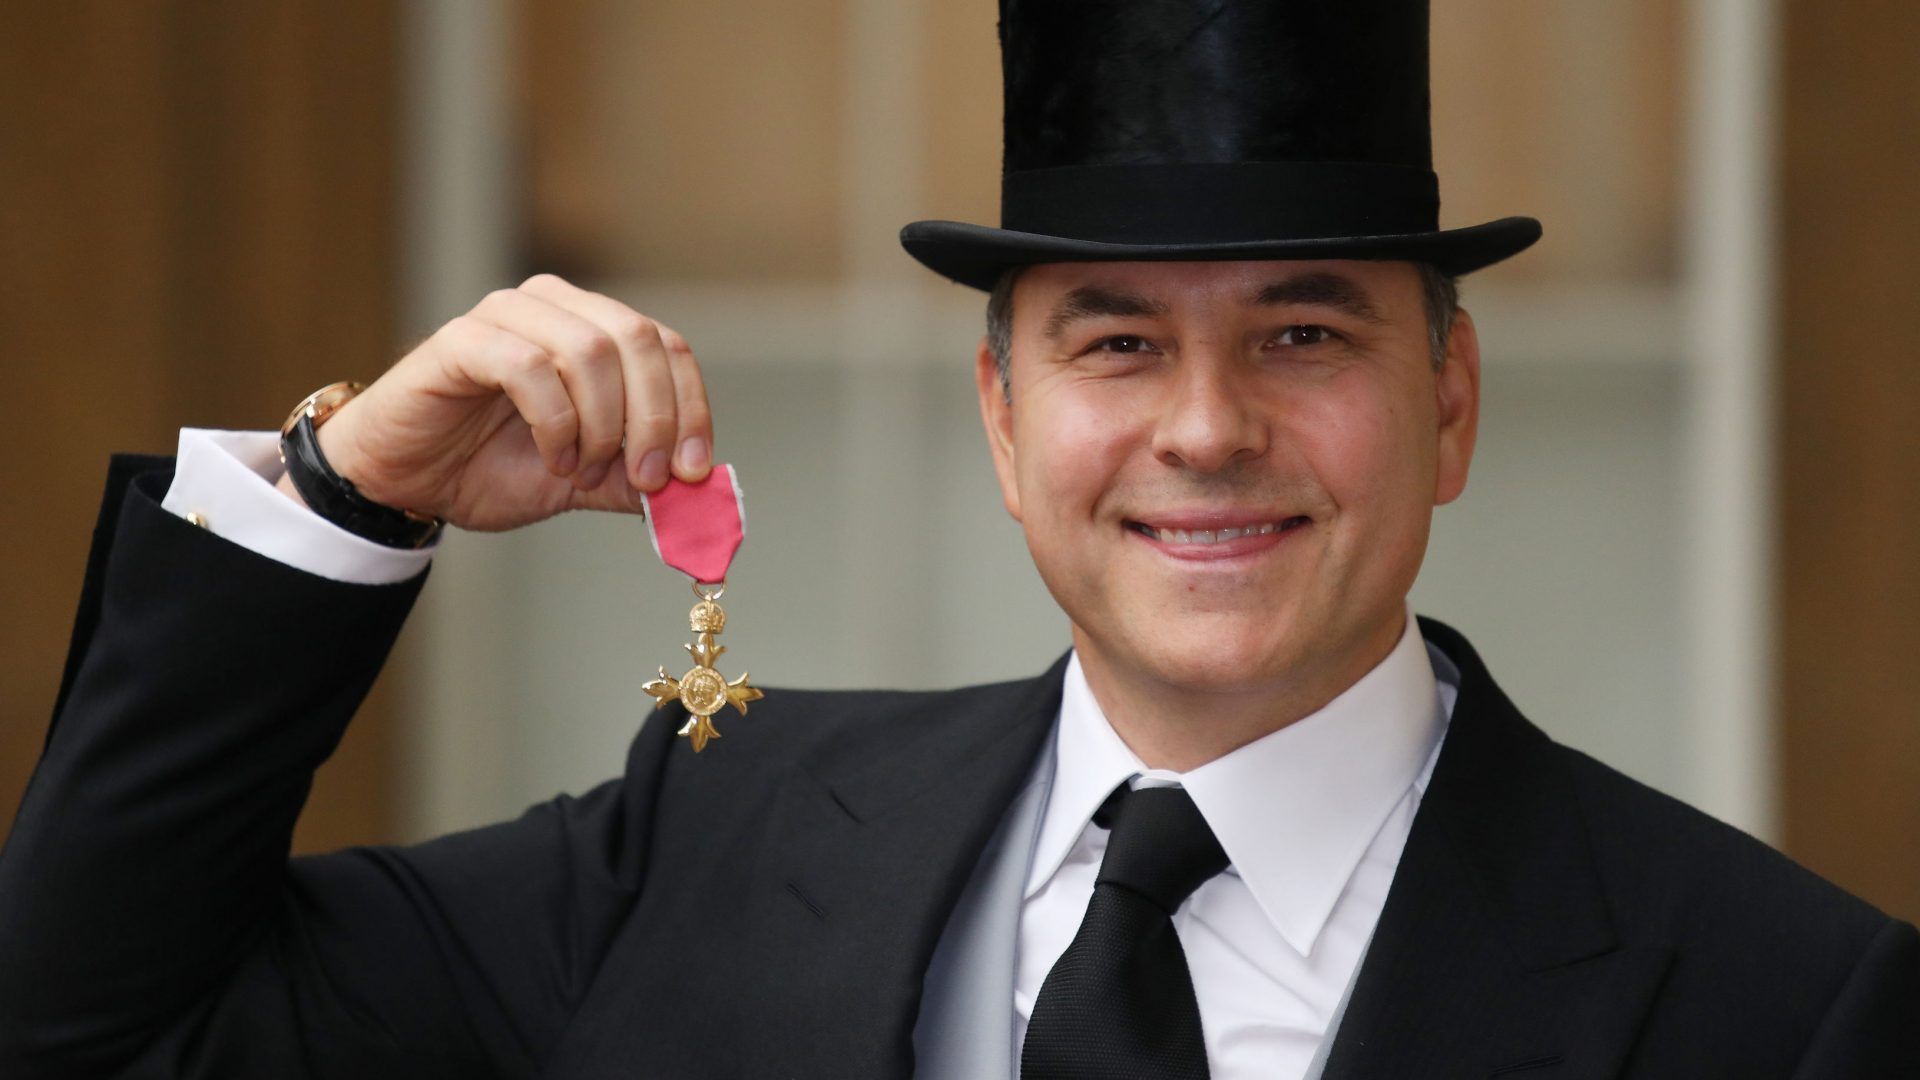 David Walliams: I'd like to have a go at swimming the Channel